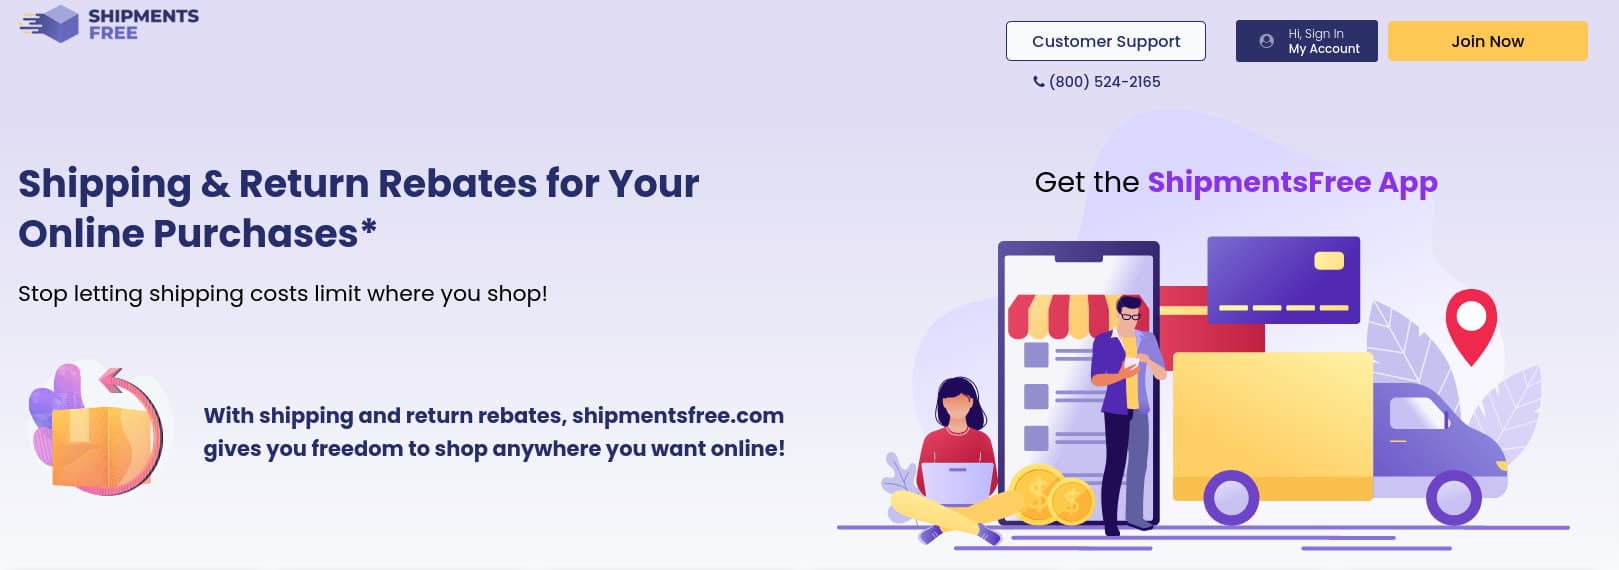 How To Cancel Shipmentsfree.Com Subscription? A Step-by-Step Guide 1